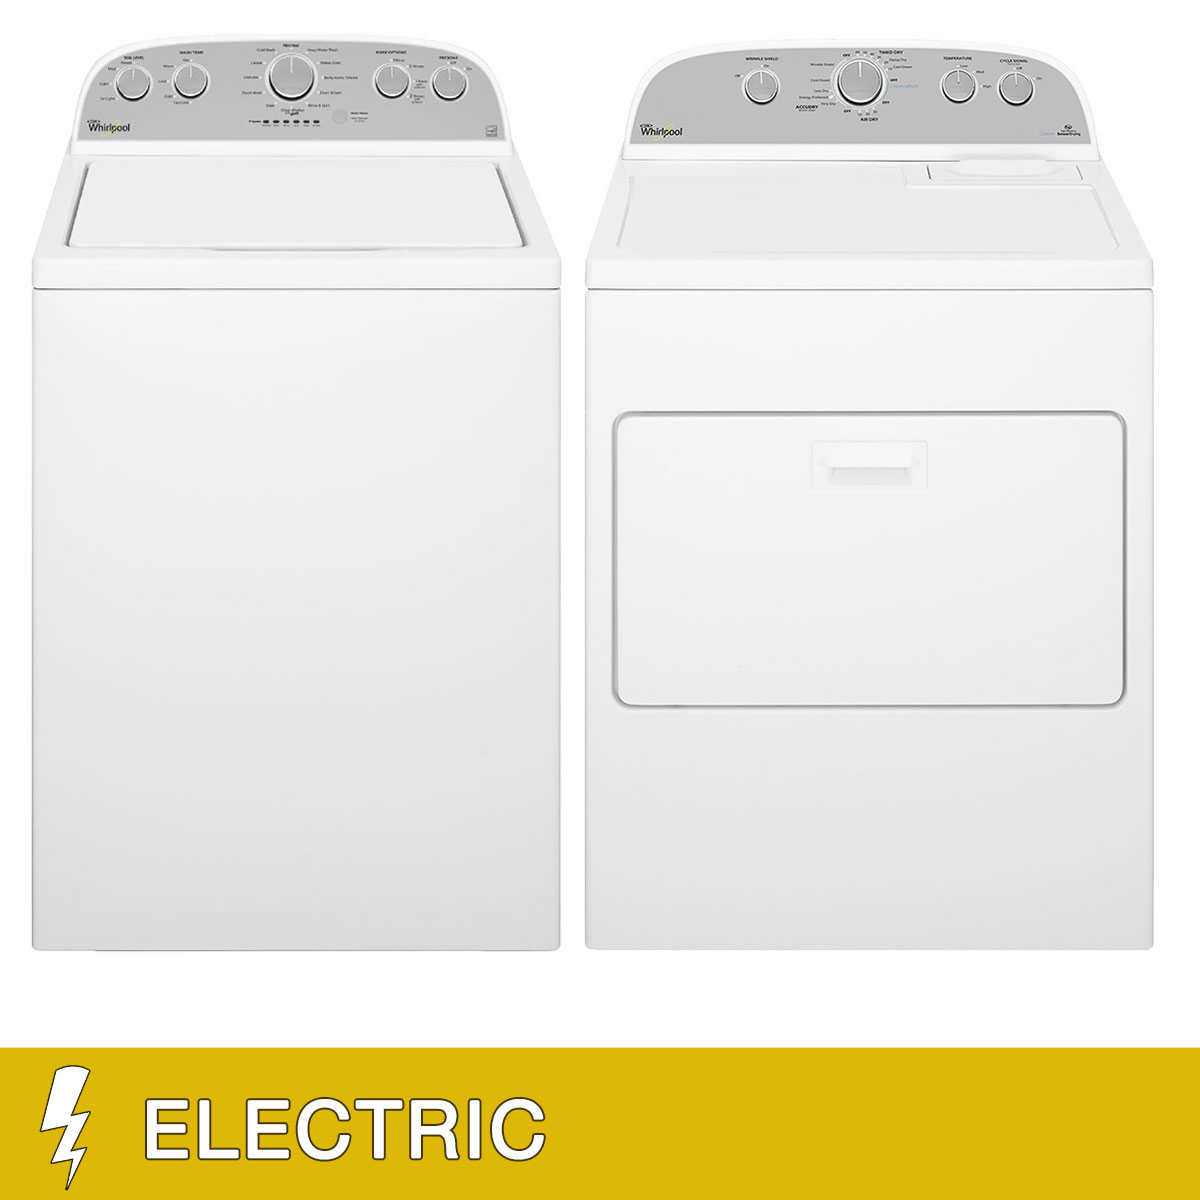 Costco Members: Whirlpool 4.3 cu. ft. Washer and 7.0 cu. ft. ELECTRIC Dryer with Sensor Drying - $499.97